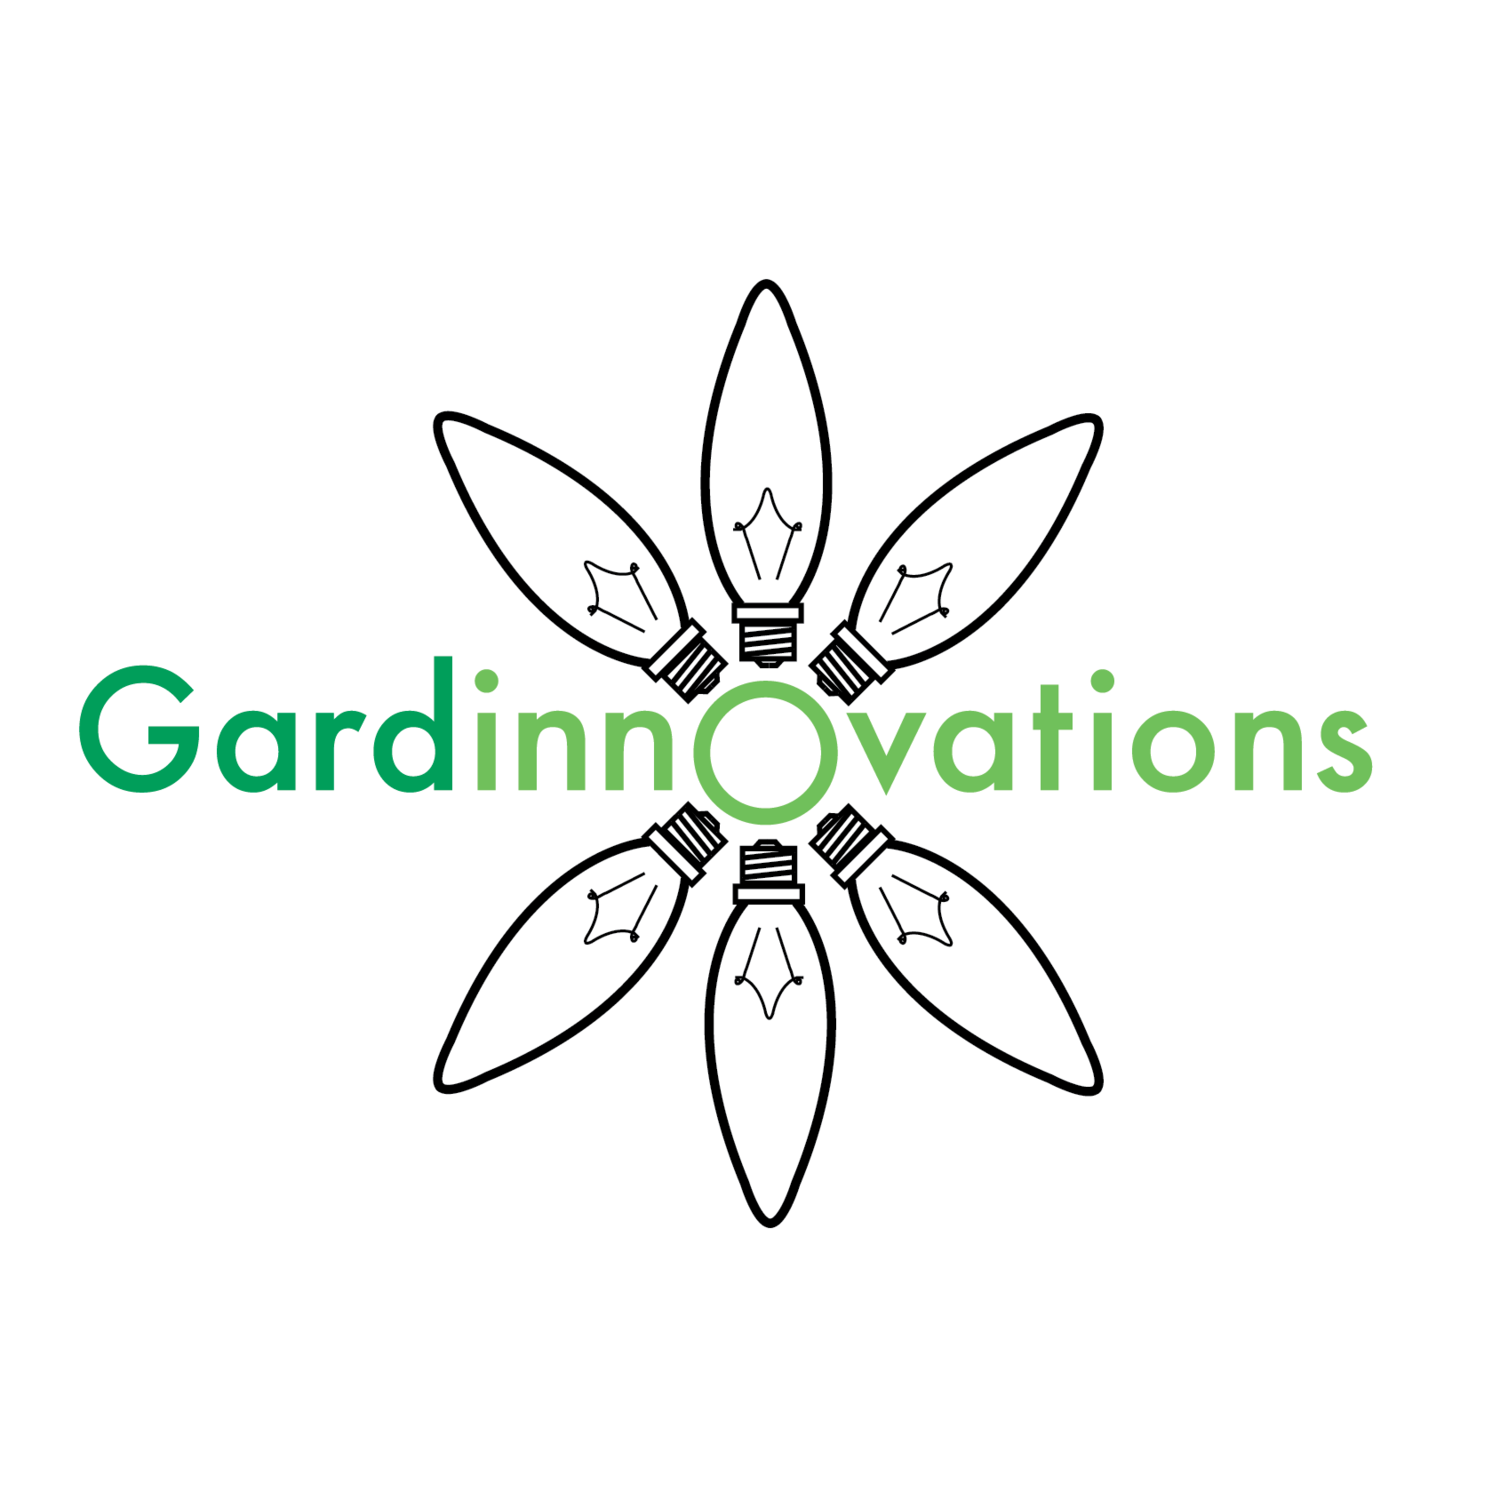 GardInnovations Logo - six lightbulbs that are arranged to look like the petals of a flower